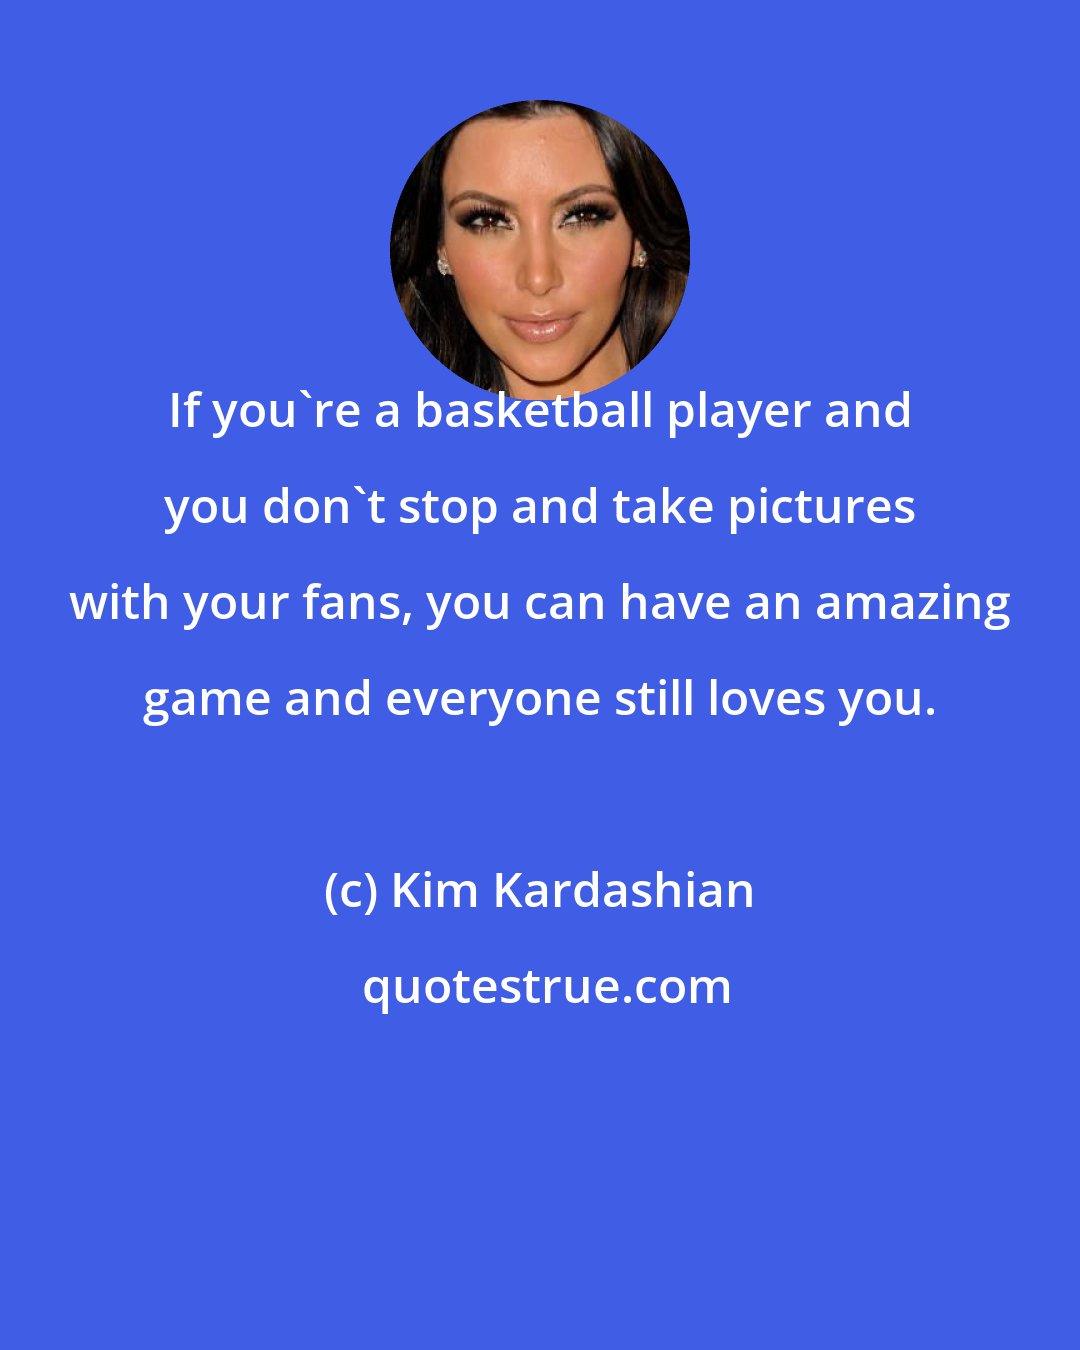 Kim Kardashian: If you're a basketball player and you don't stop and take pictures with your fans, you can have an amazing game and everyone still loves you.